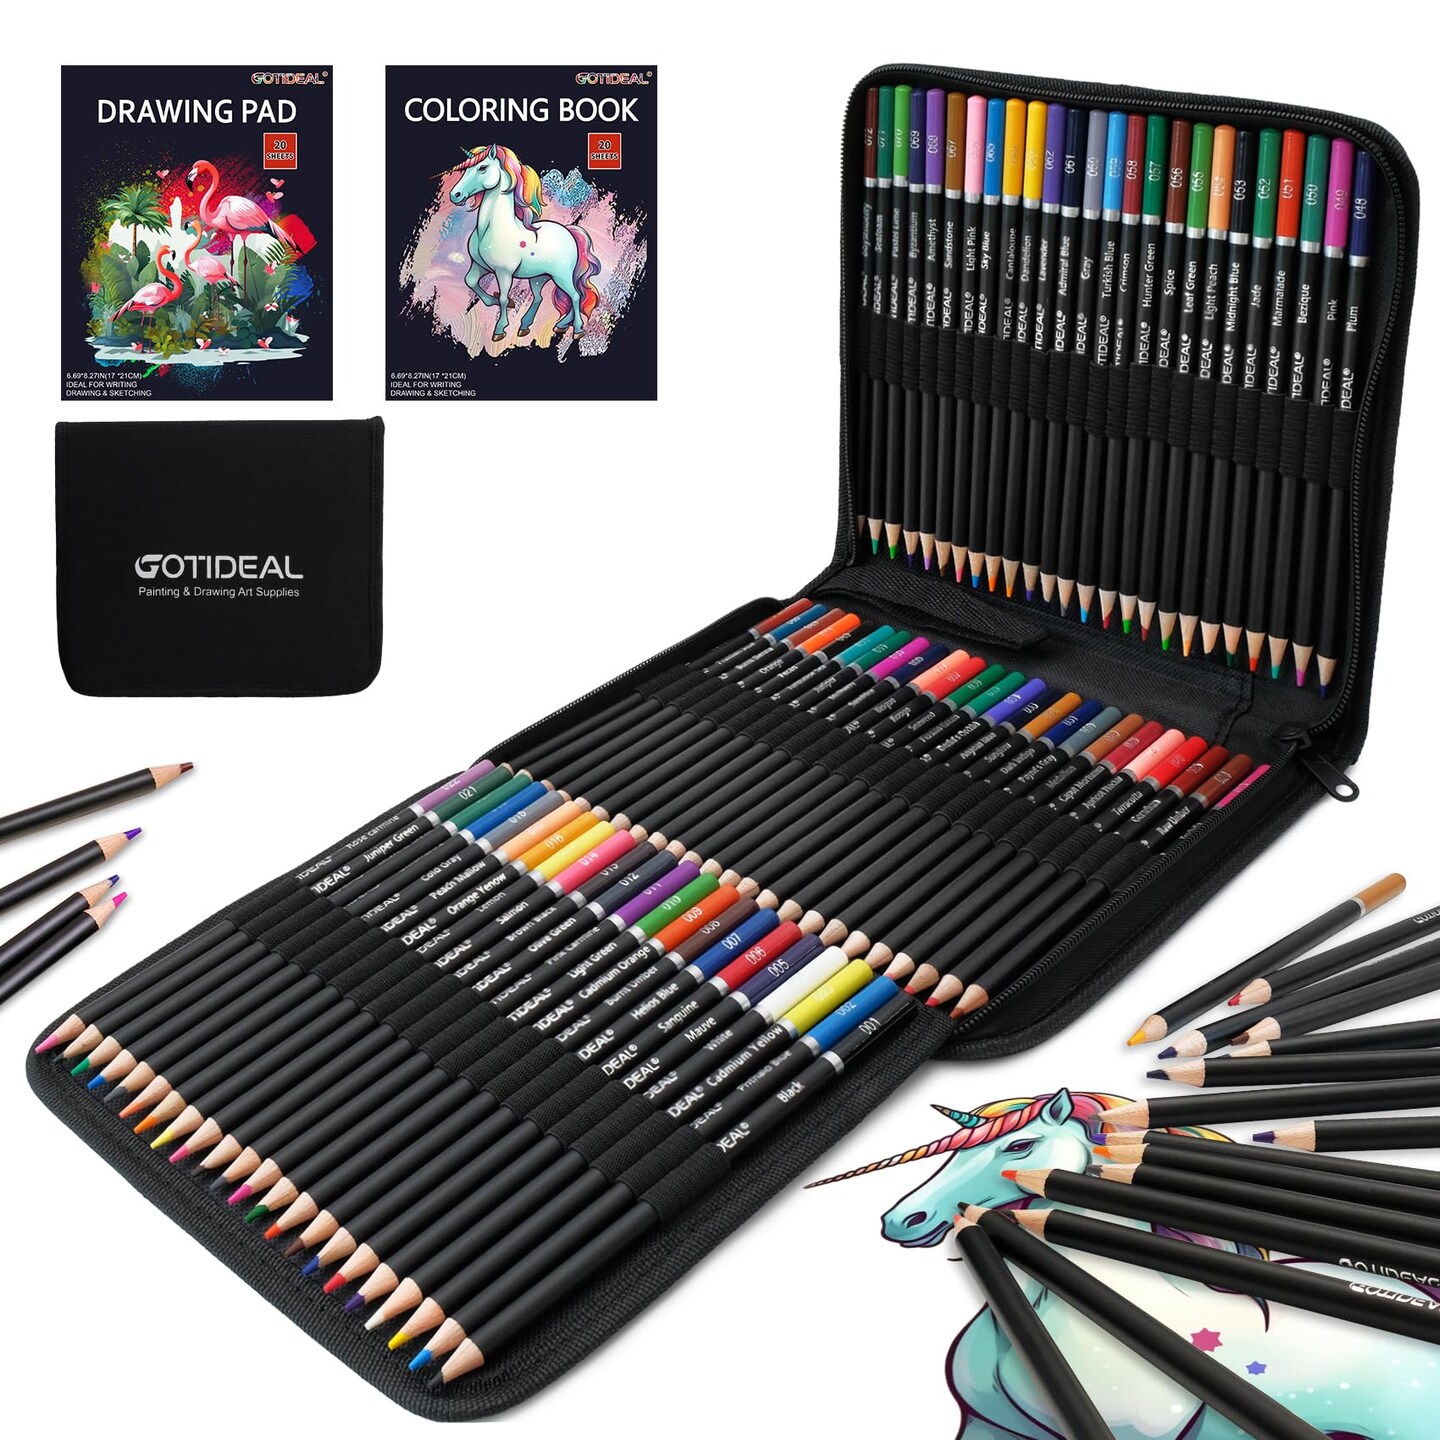 GOTIDEAL 72 Colored Pencil Set with Case for Adult Coloring with Sketch Paper and Coloring Book, Artists Pencil Supplies Gift for Adults Kids Beginners Oil Based